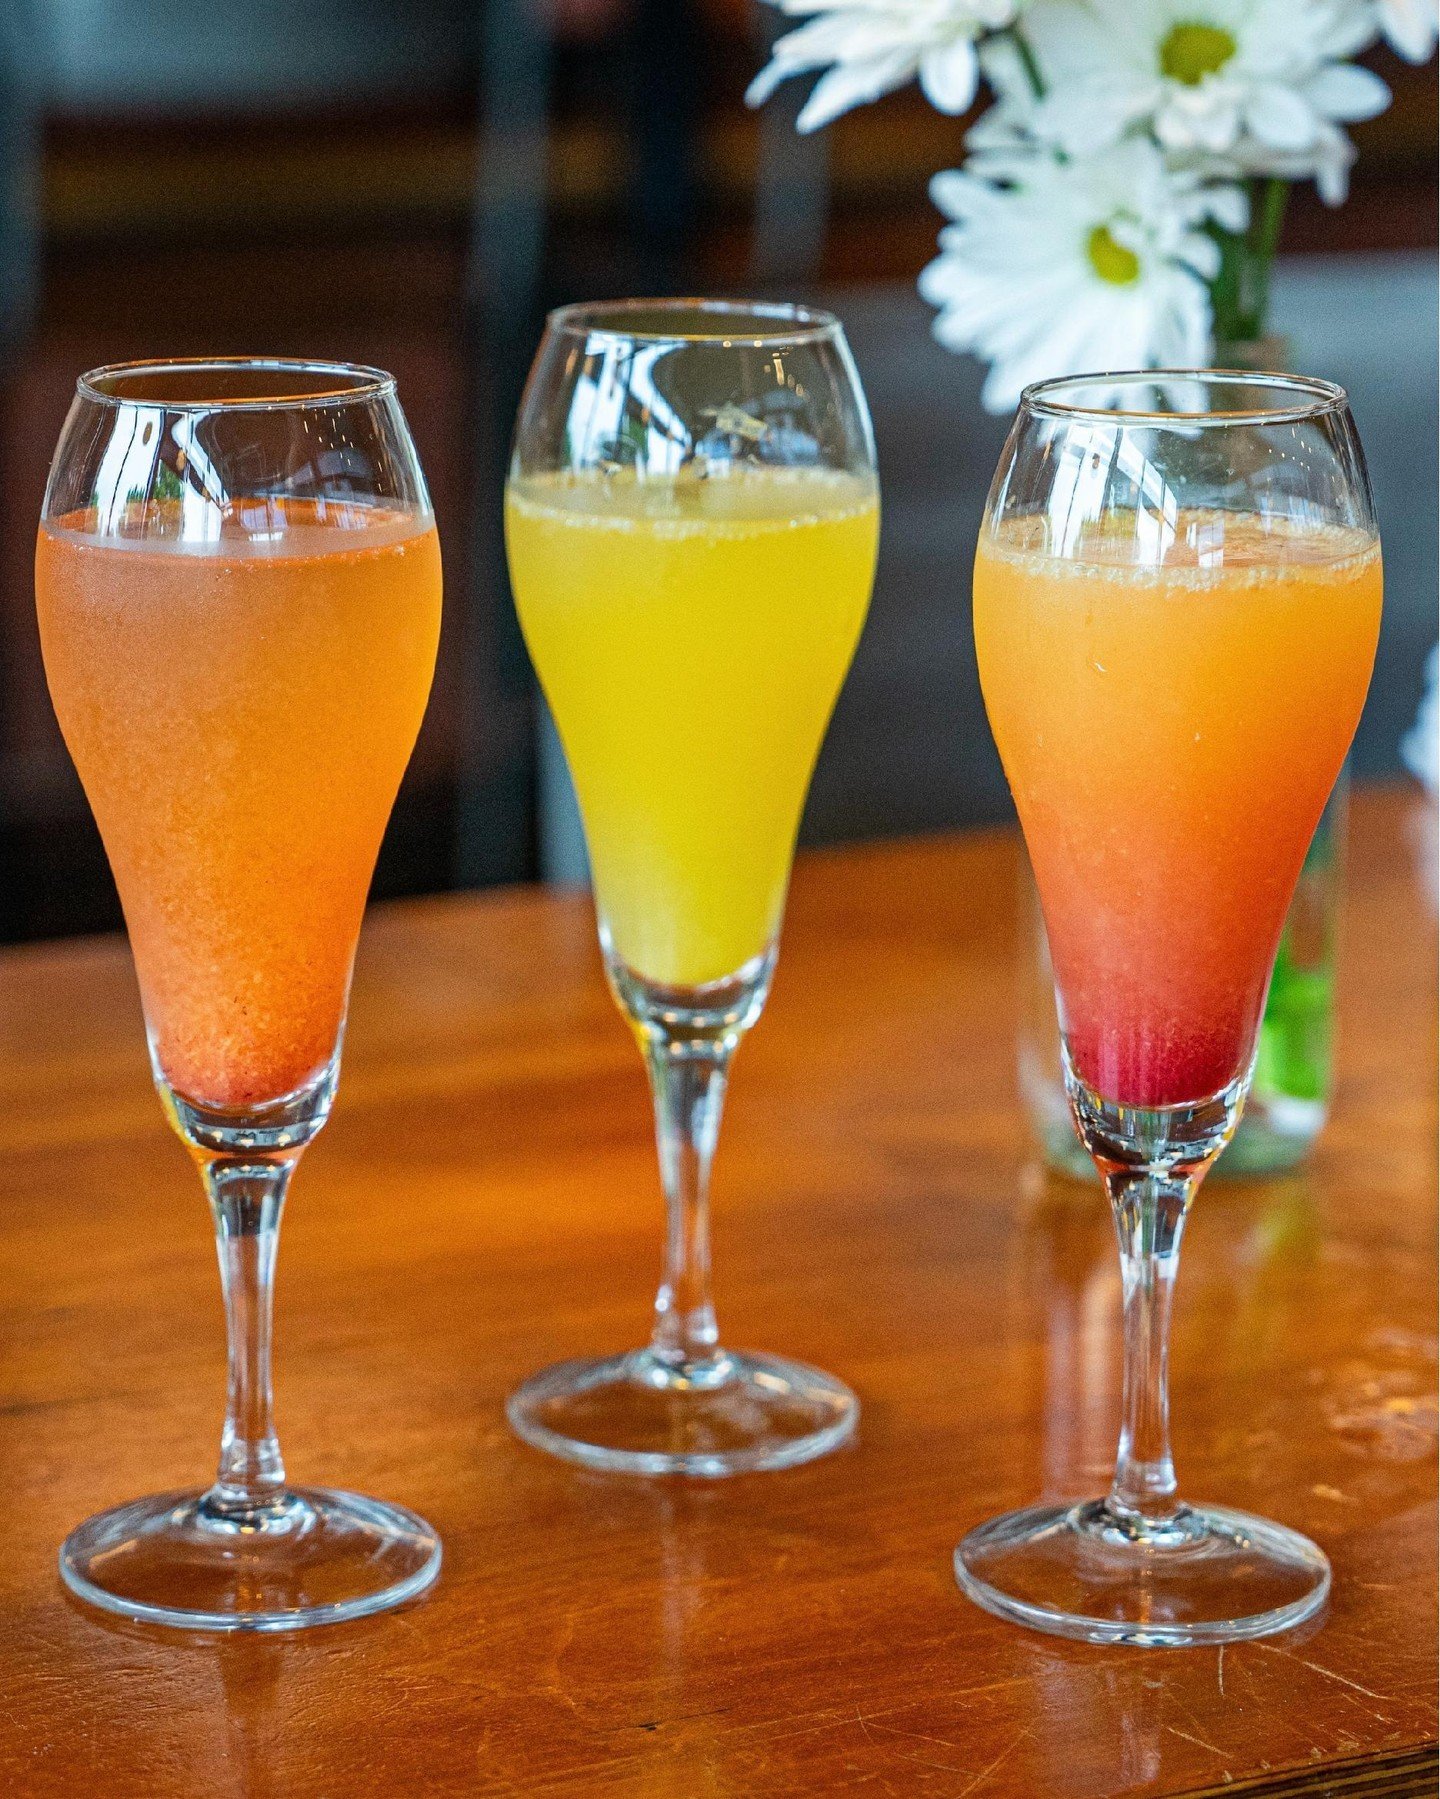 It's finally Friday which means it's time for mimosas!🍾

🥂Mimosa: fresh fresh orange juice and champagne
🥂Tipsie Nonnie: fresh grapefruit, champagne, strawberry, and vodka
🥂Sunset Mimosa: fresh orange juice, champagne, and a splash of raspberry

